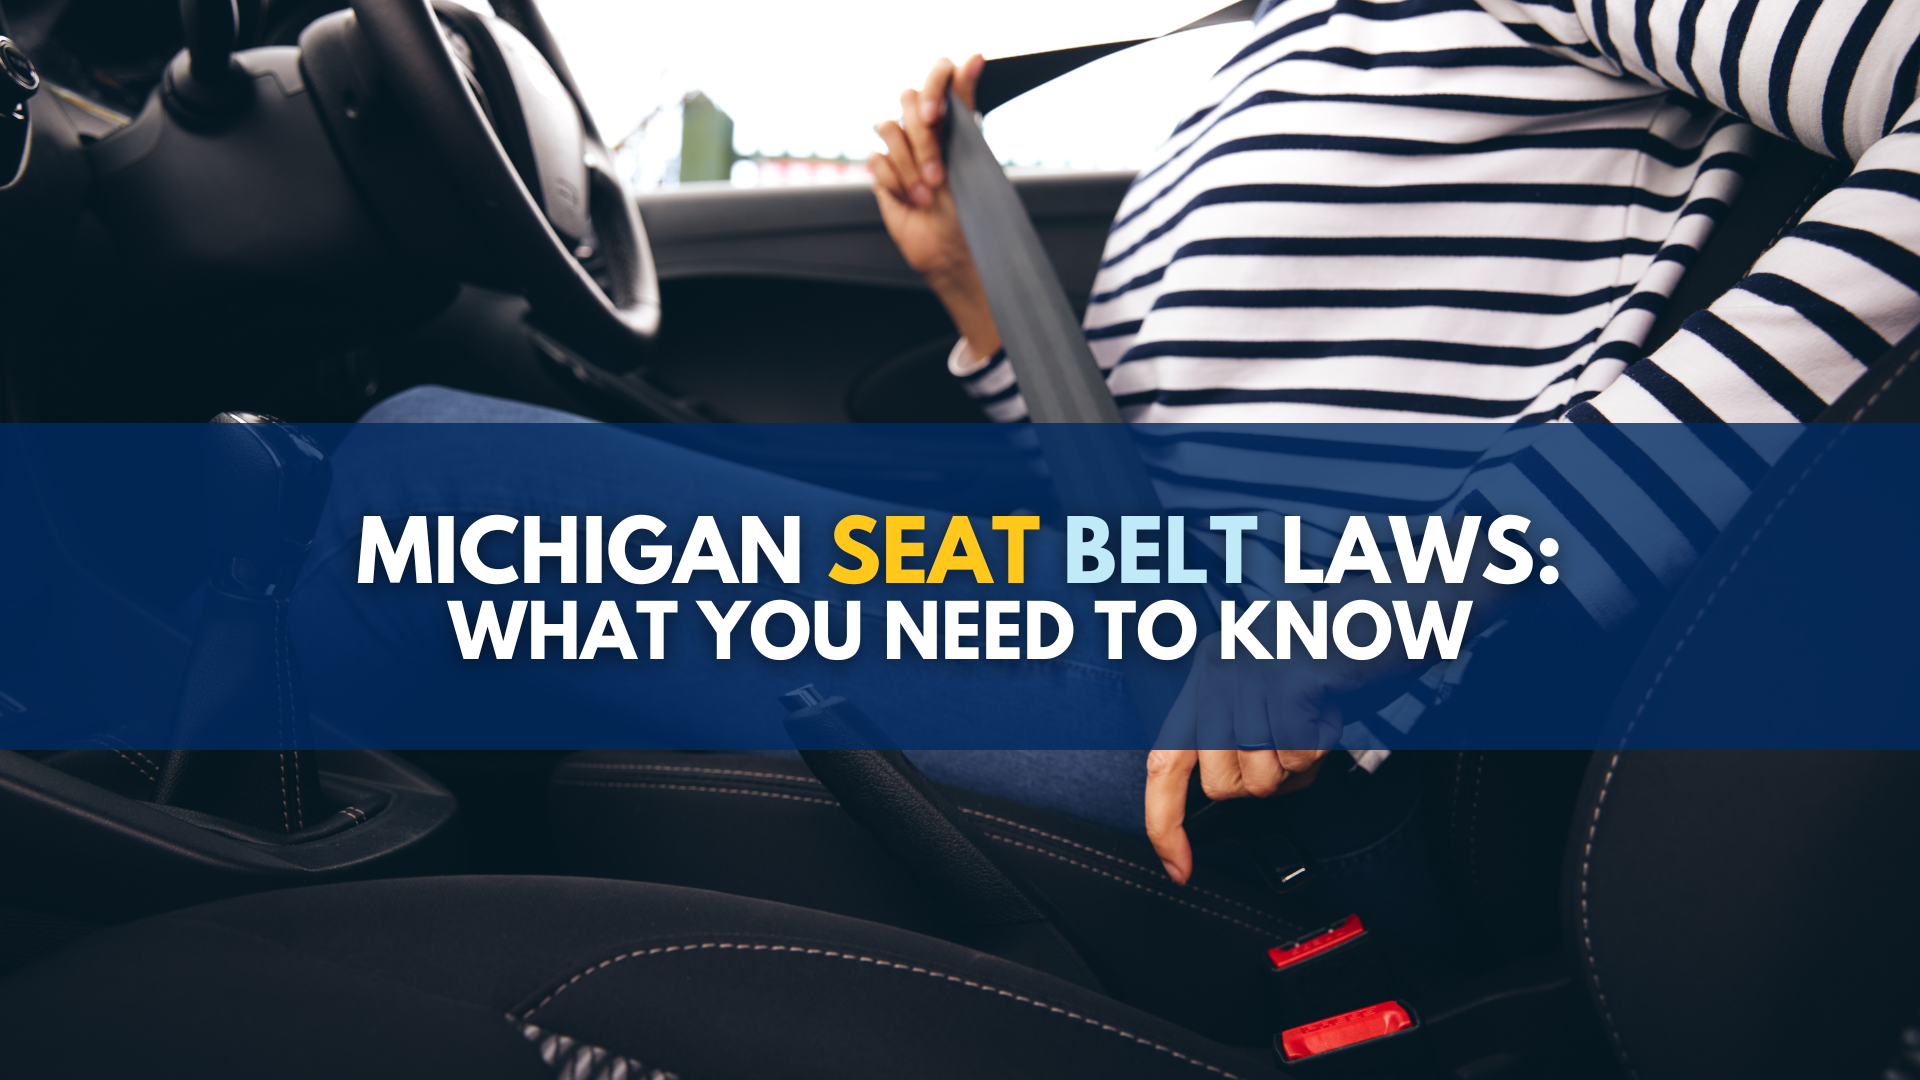 Michigan seat belt laws: what you need to know